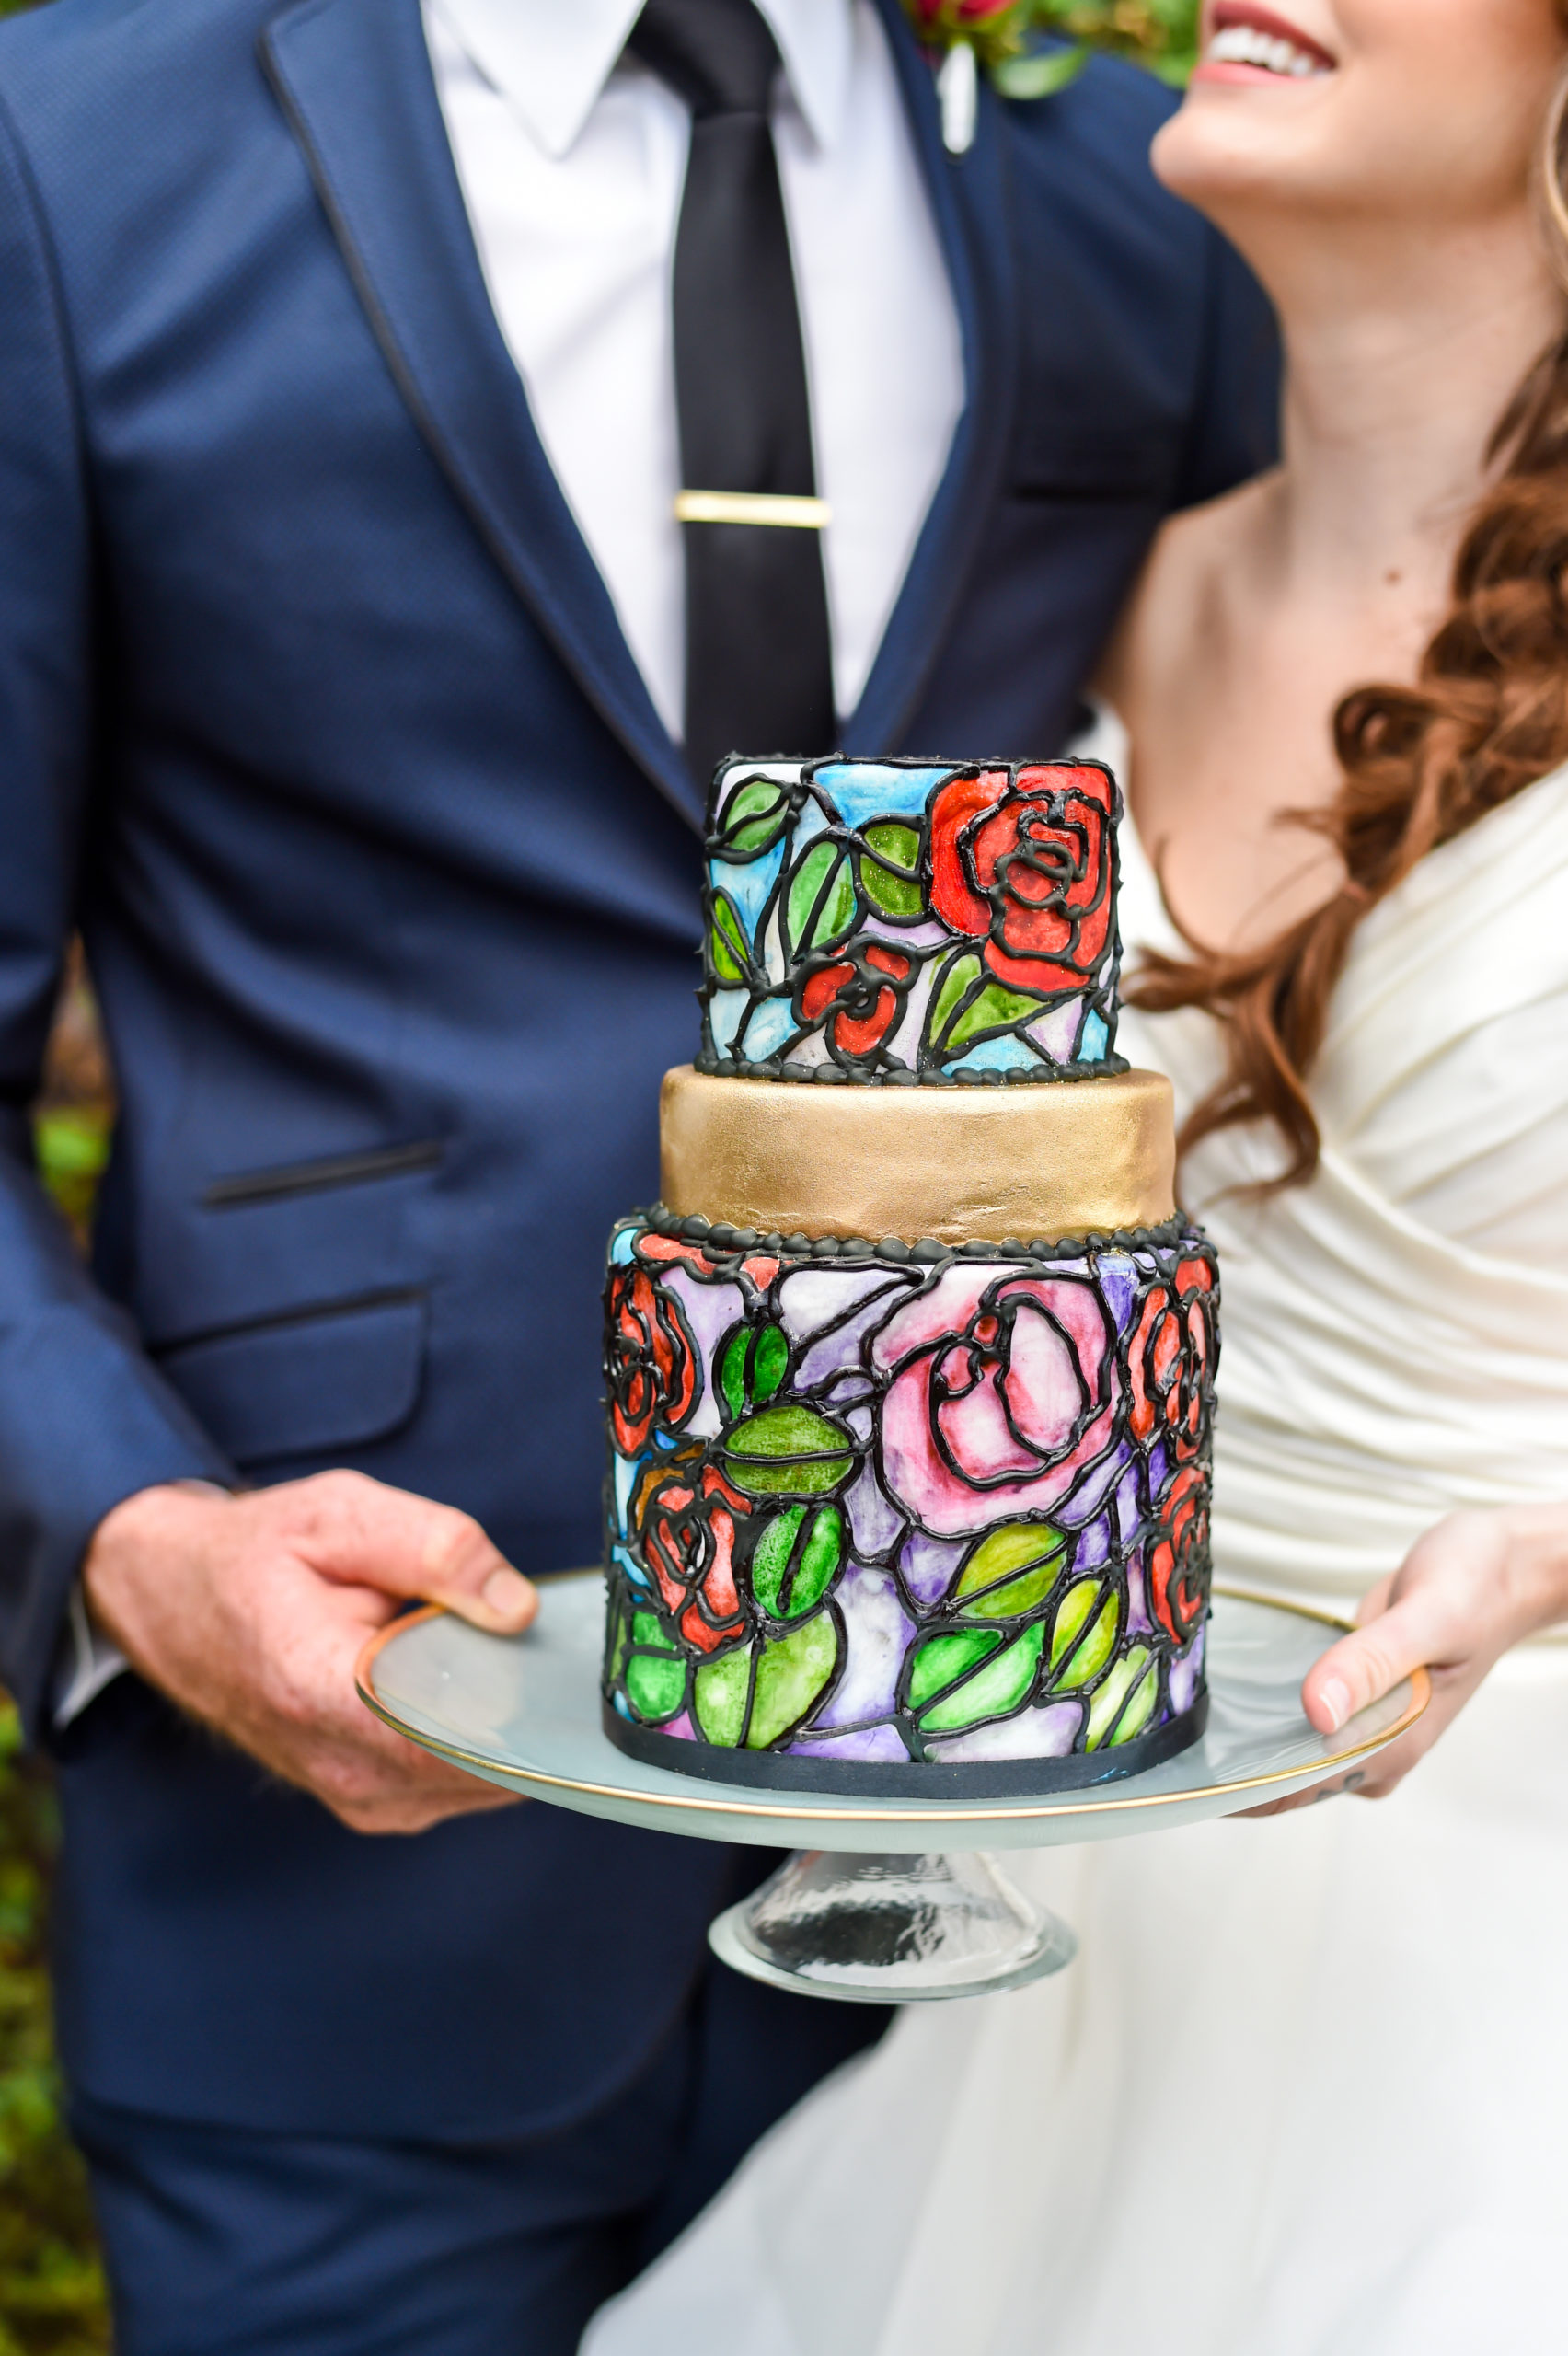 Need Disney wedding ideas for your cake? A stained glass wedding cake or stained glass cake are the perfect way to express color for this Beauty and the Beast wedding